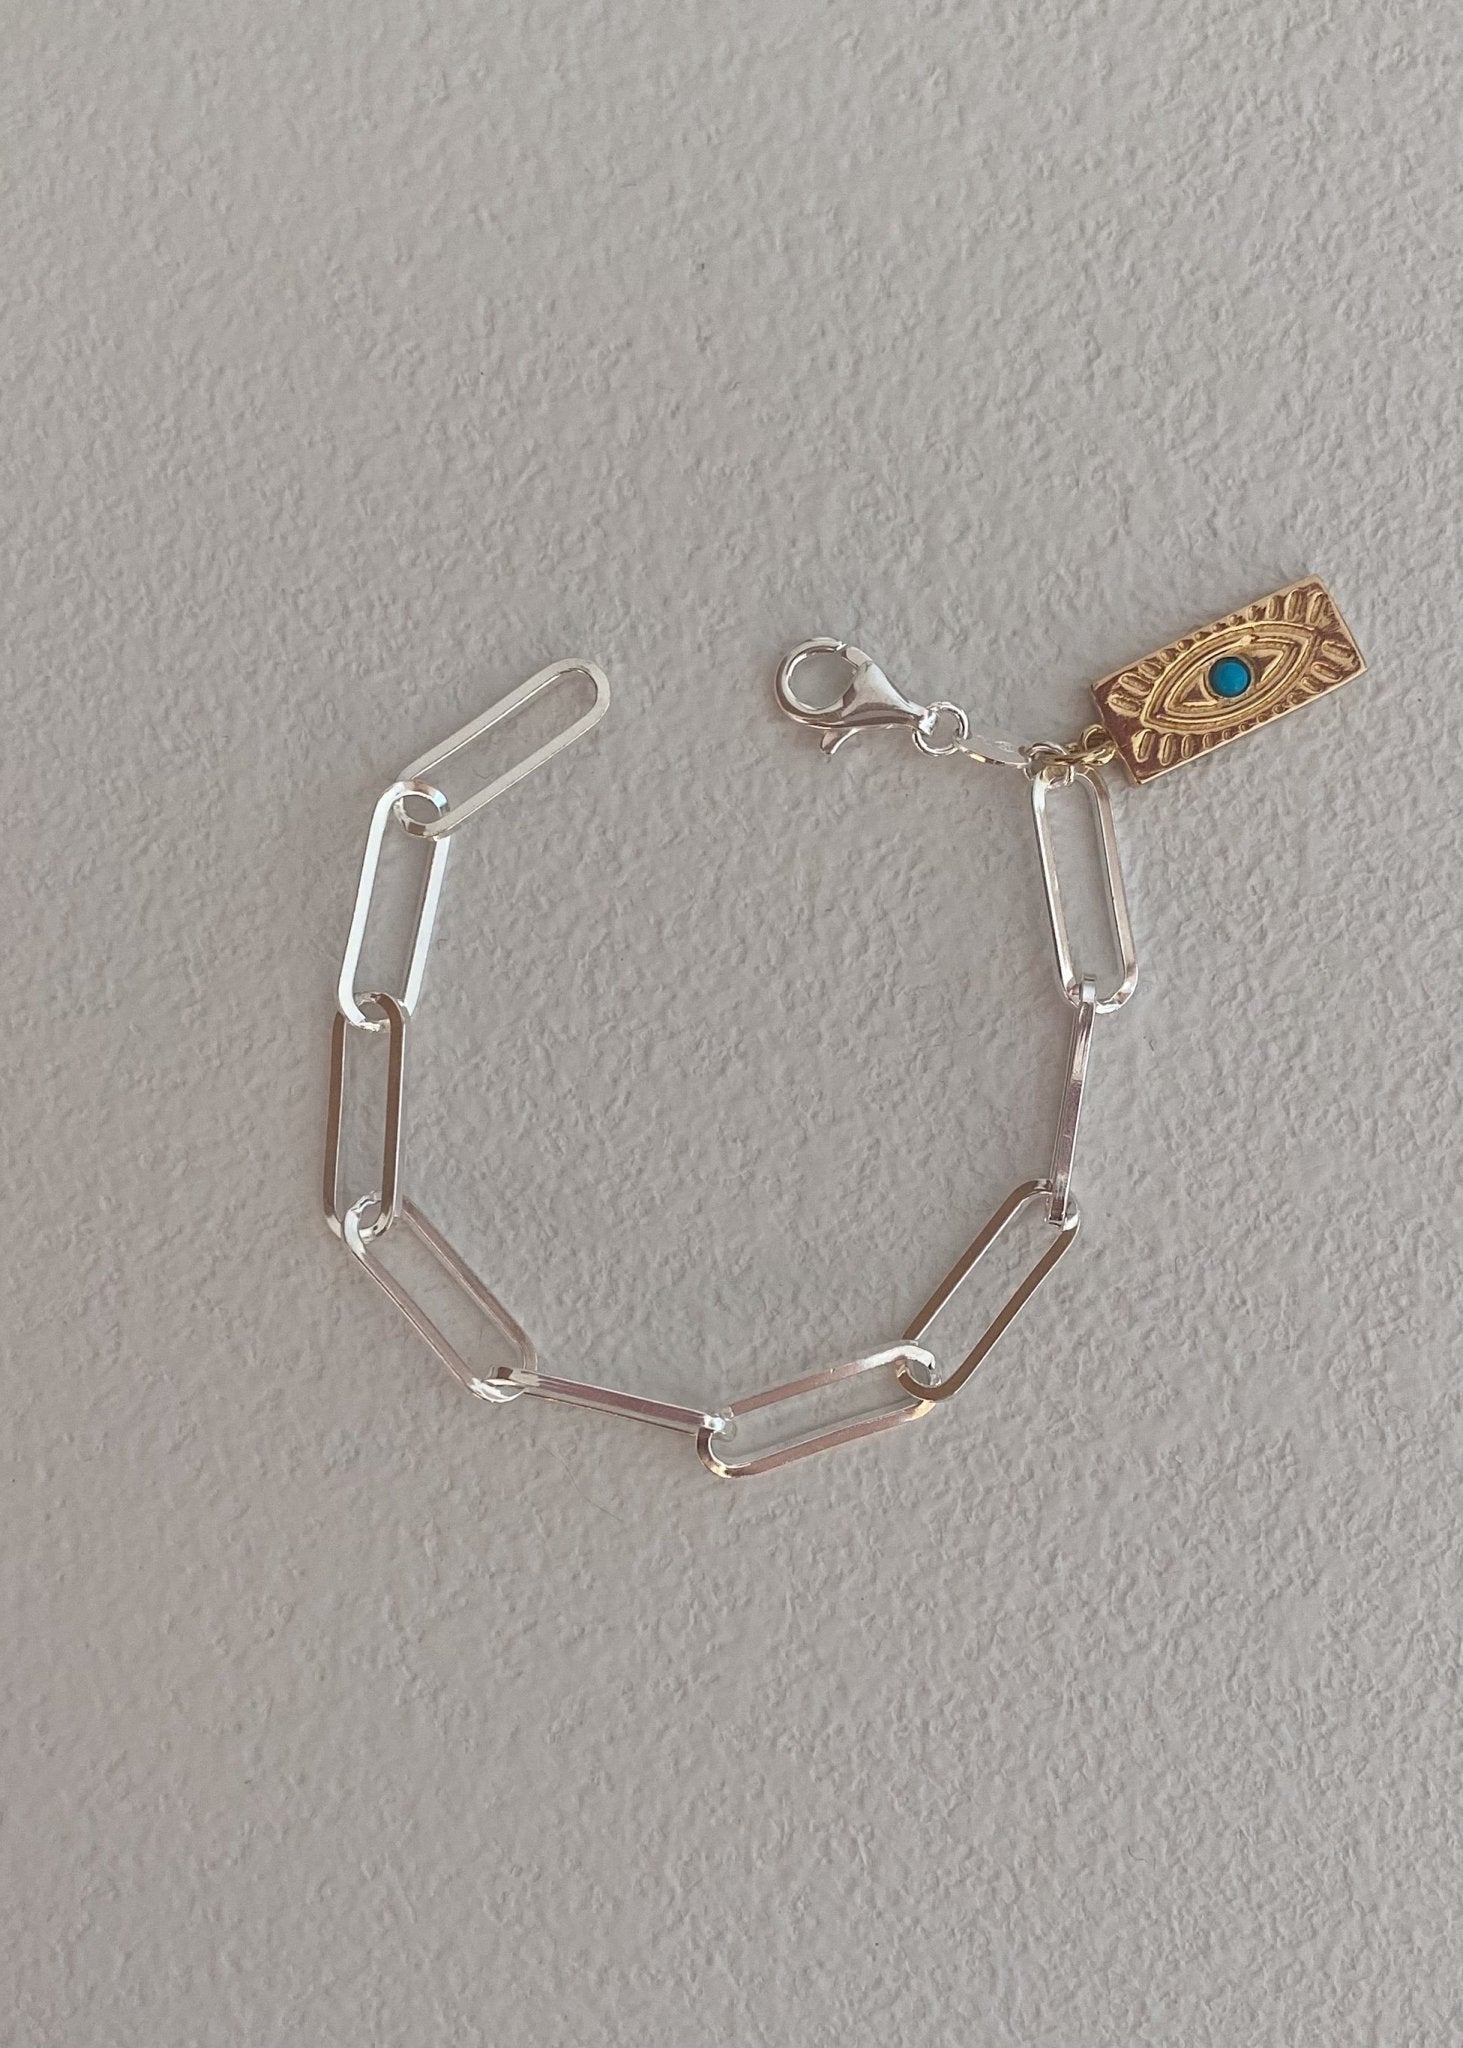 Oia Paperclip Bracelet - Espace Skins Montreal